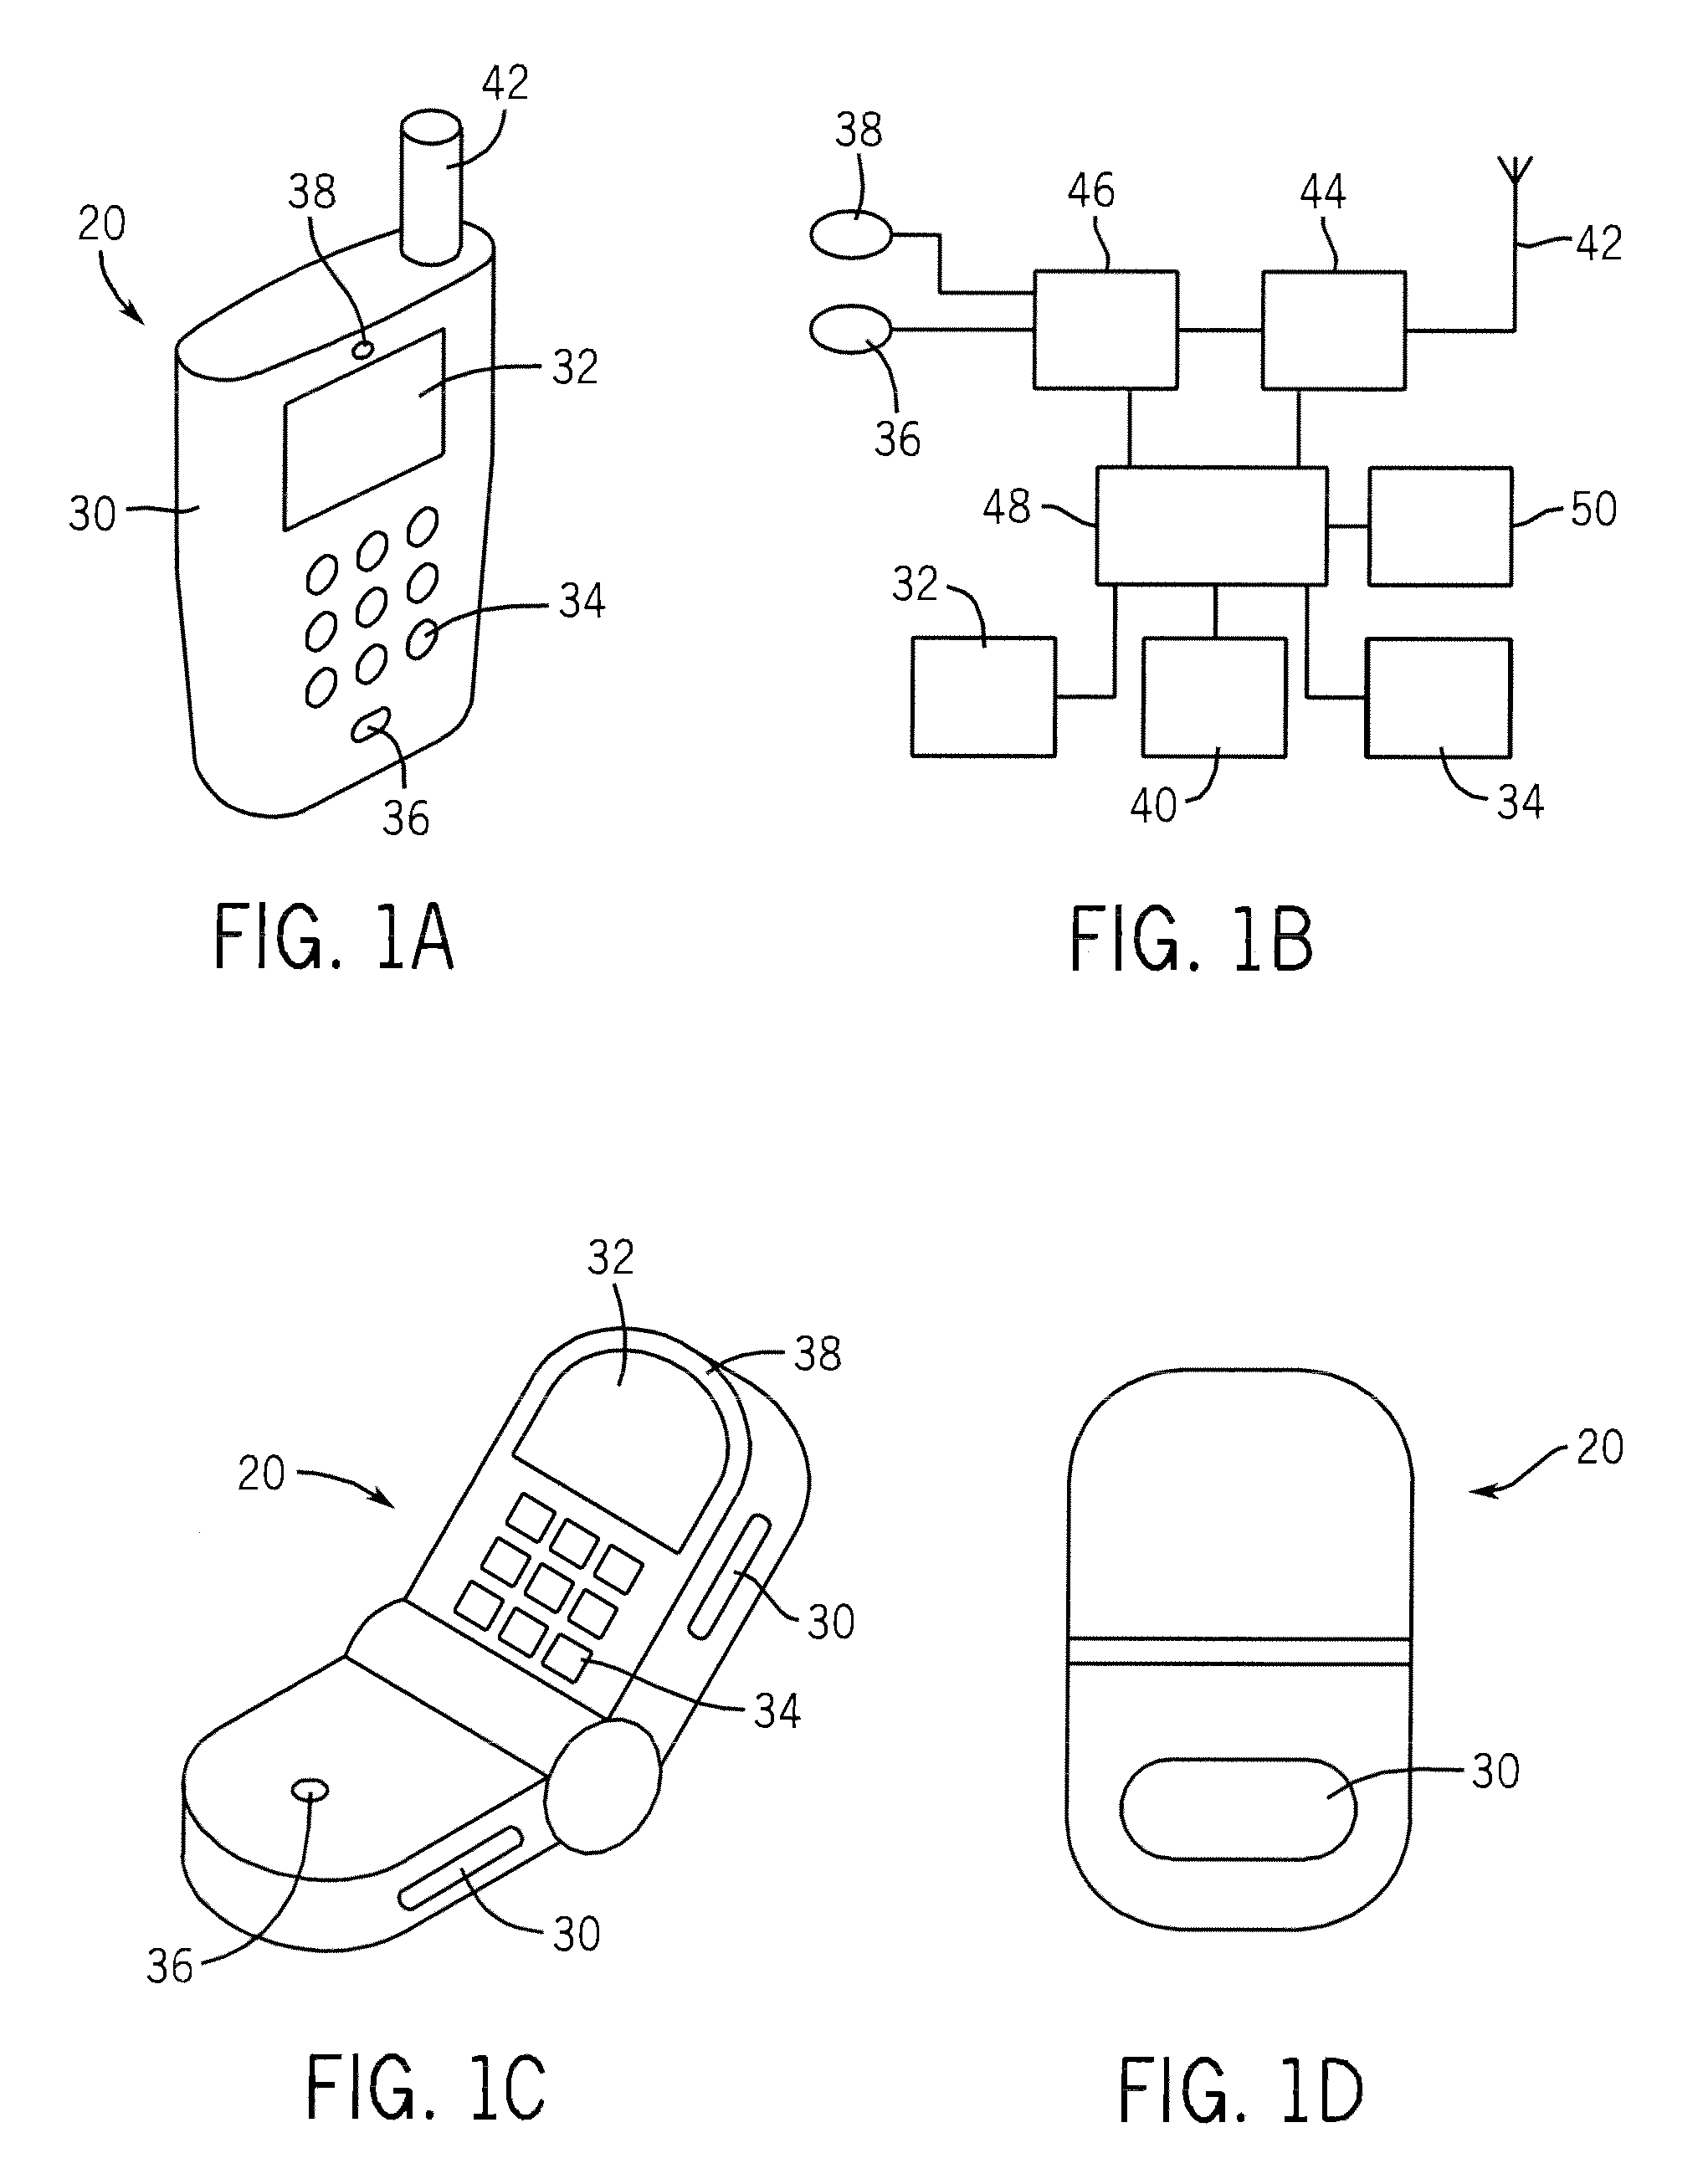 System and method for preventing copying of electronic component designs